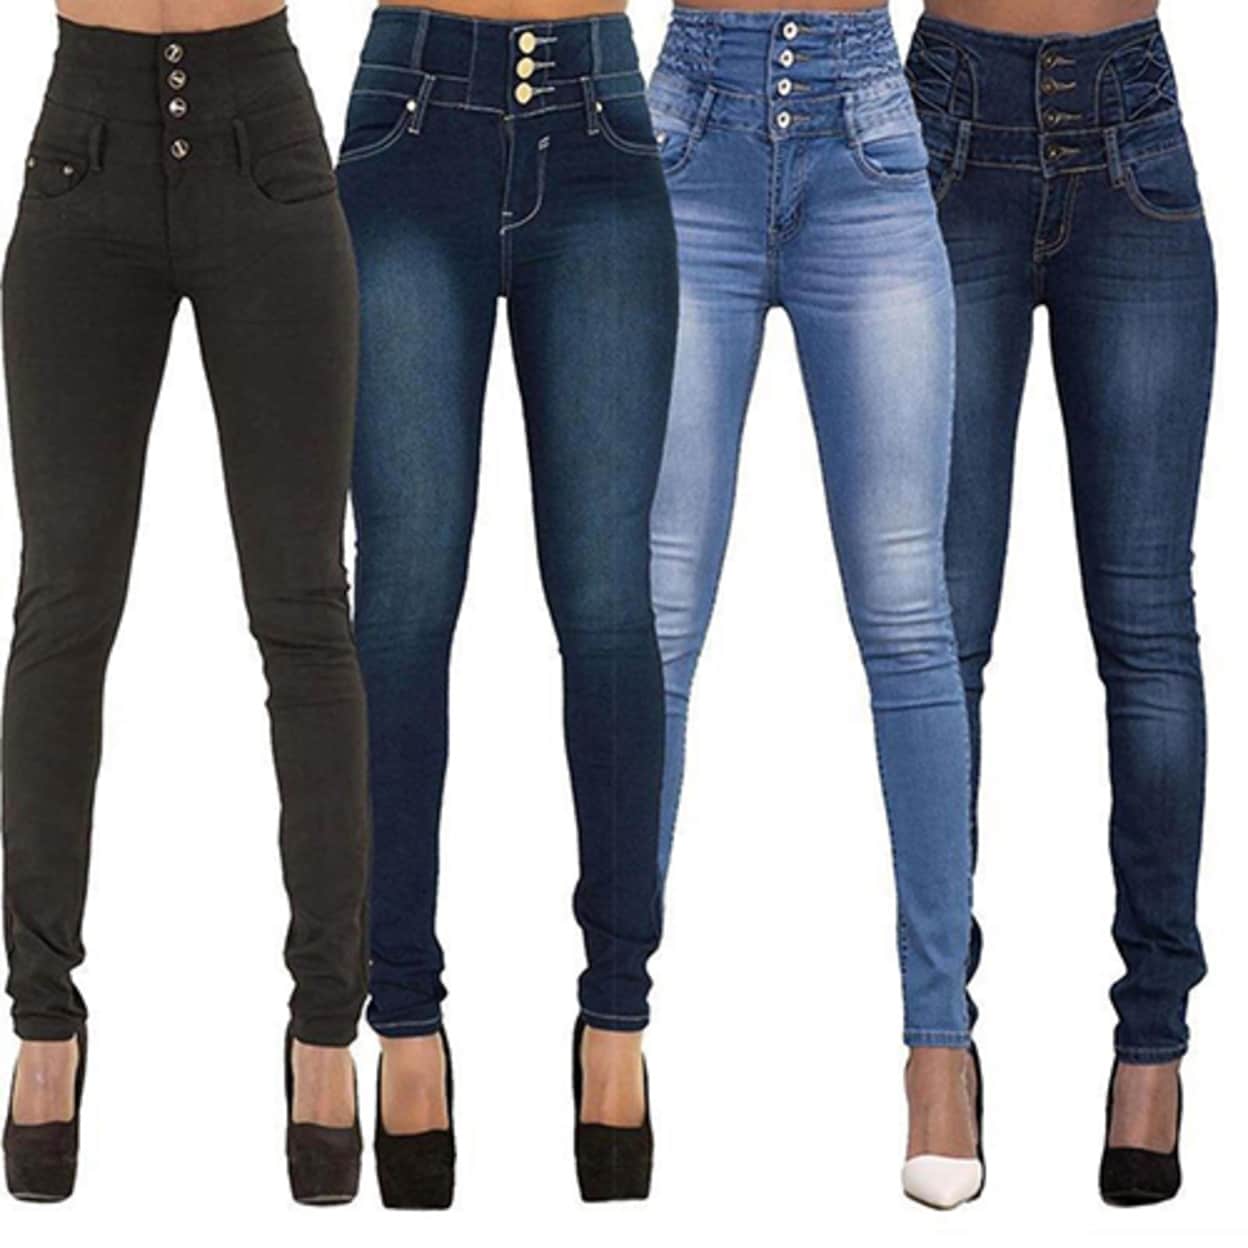 thin stretchy jeans